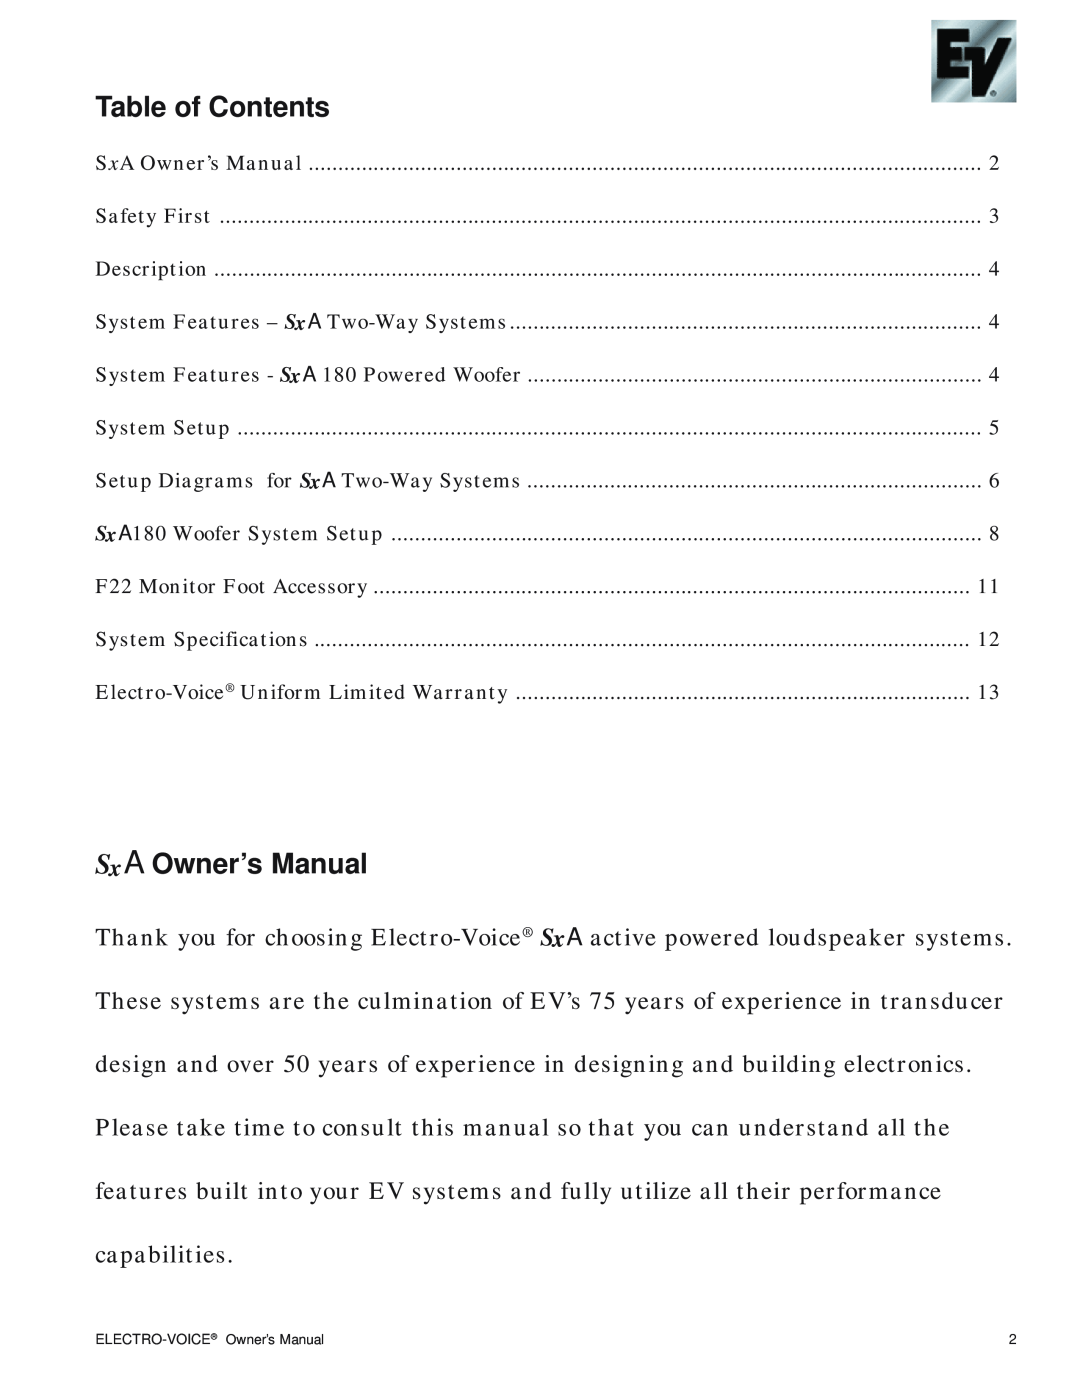 Electro-Voice SxA100+ owner manual Table of Contents 